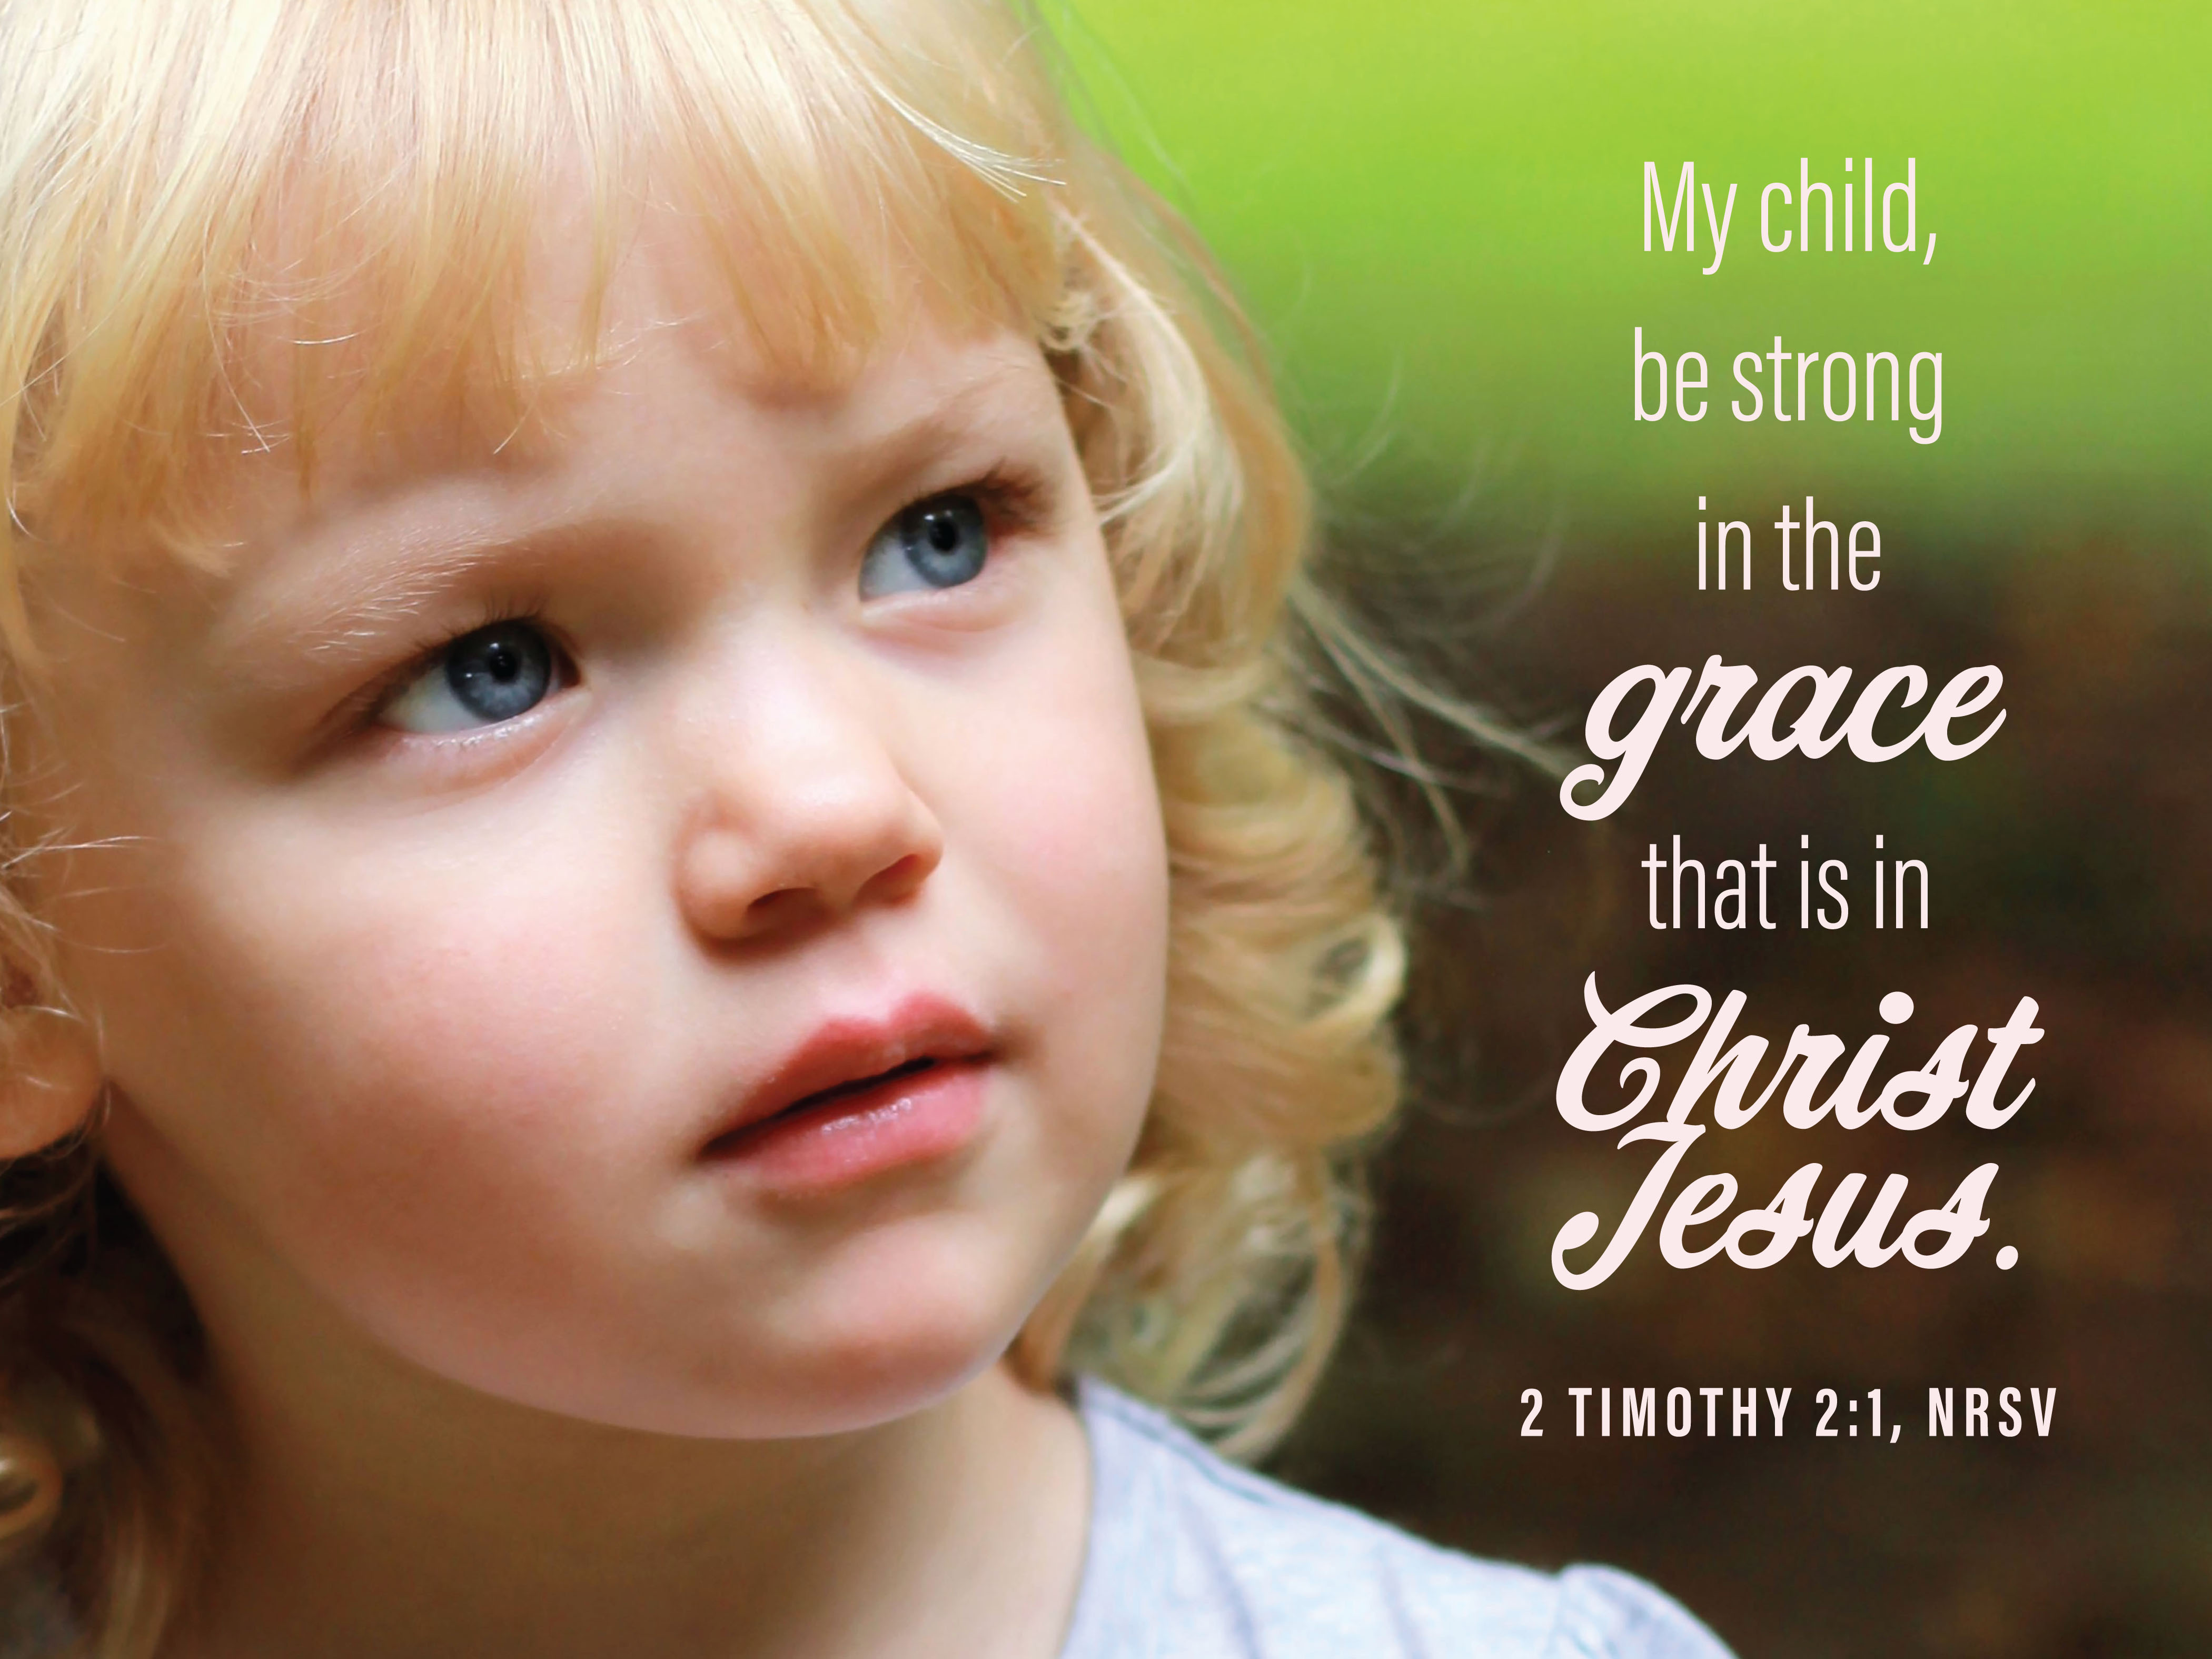 My child, be strong in the grace that is in Christ Jesus. 2 Timothy 2:1 (NRSV)